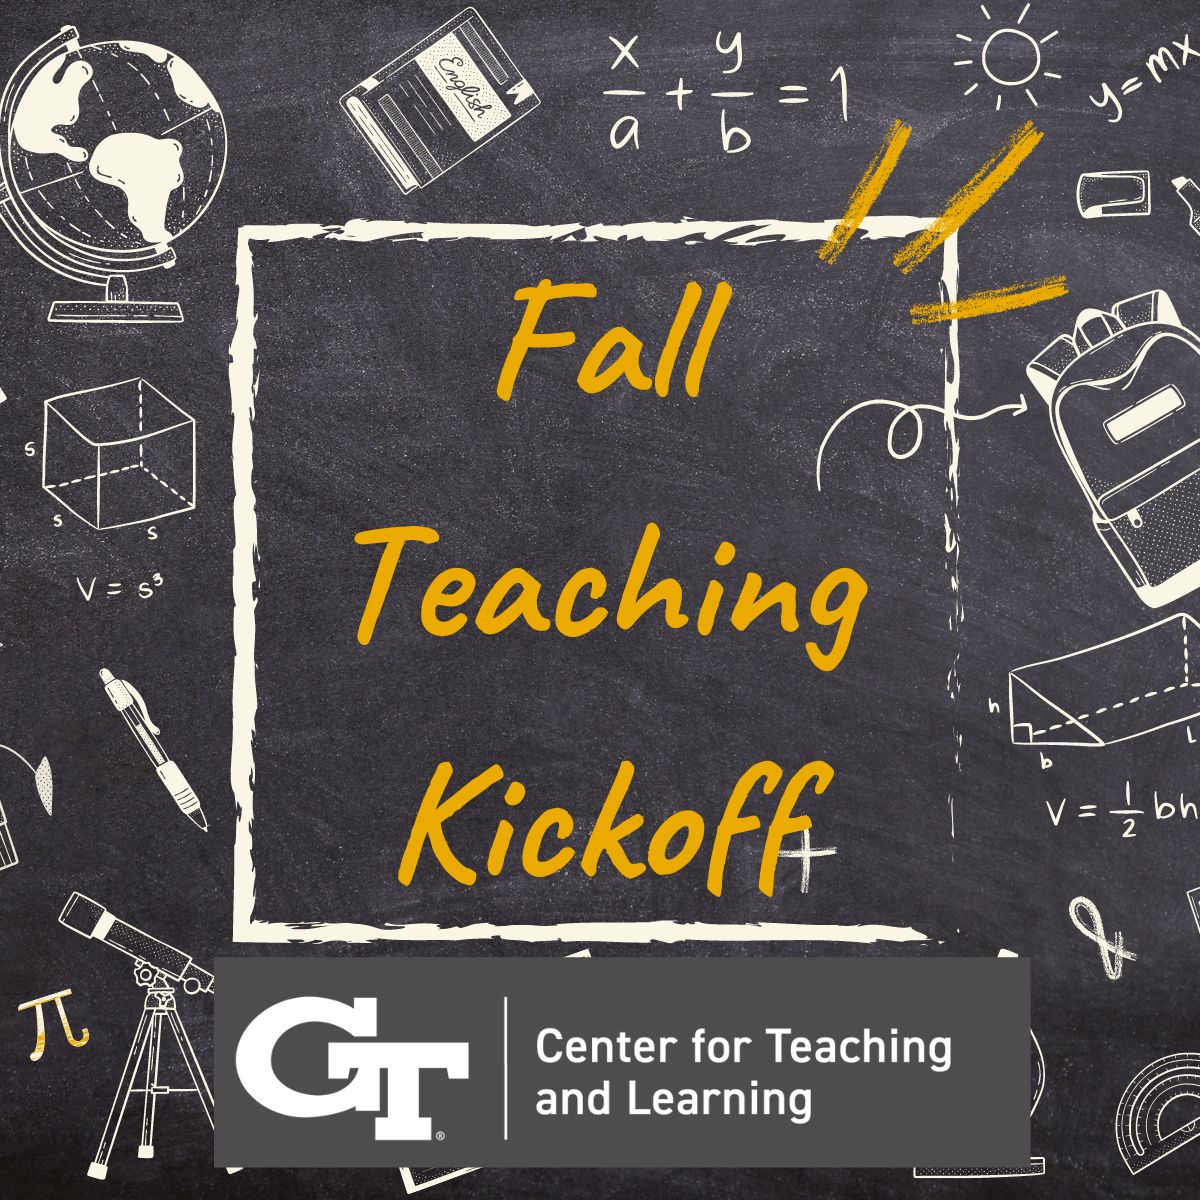 Image reads "fall teaching kickoff" with images of school related items around it (backpacks, globes, etc.).